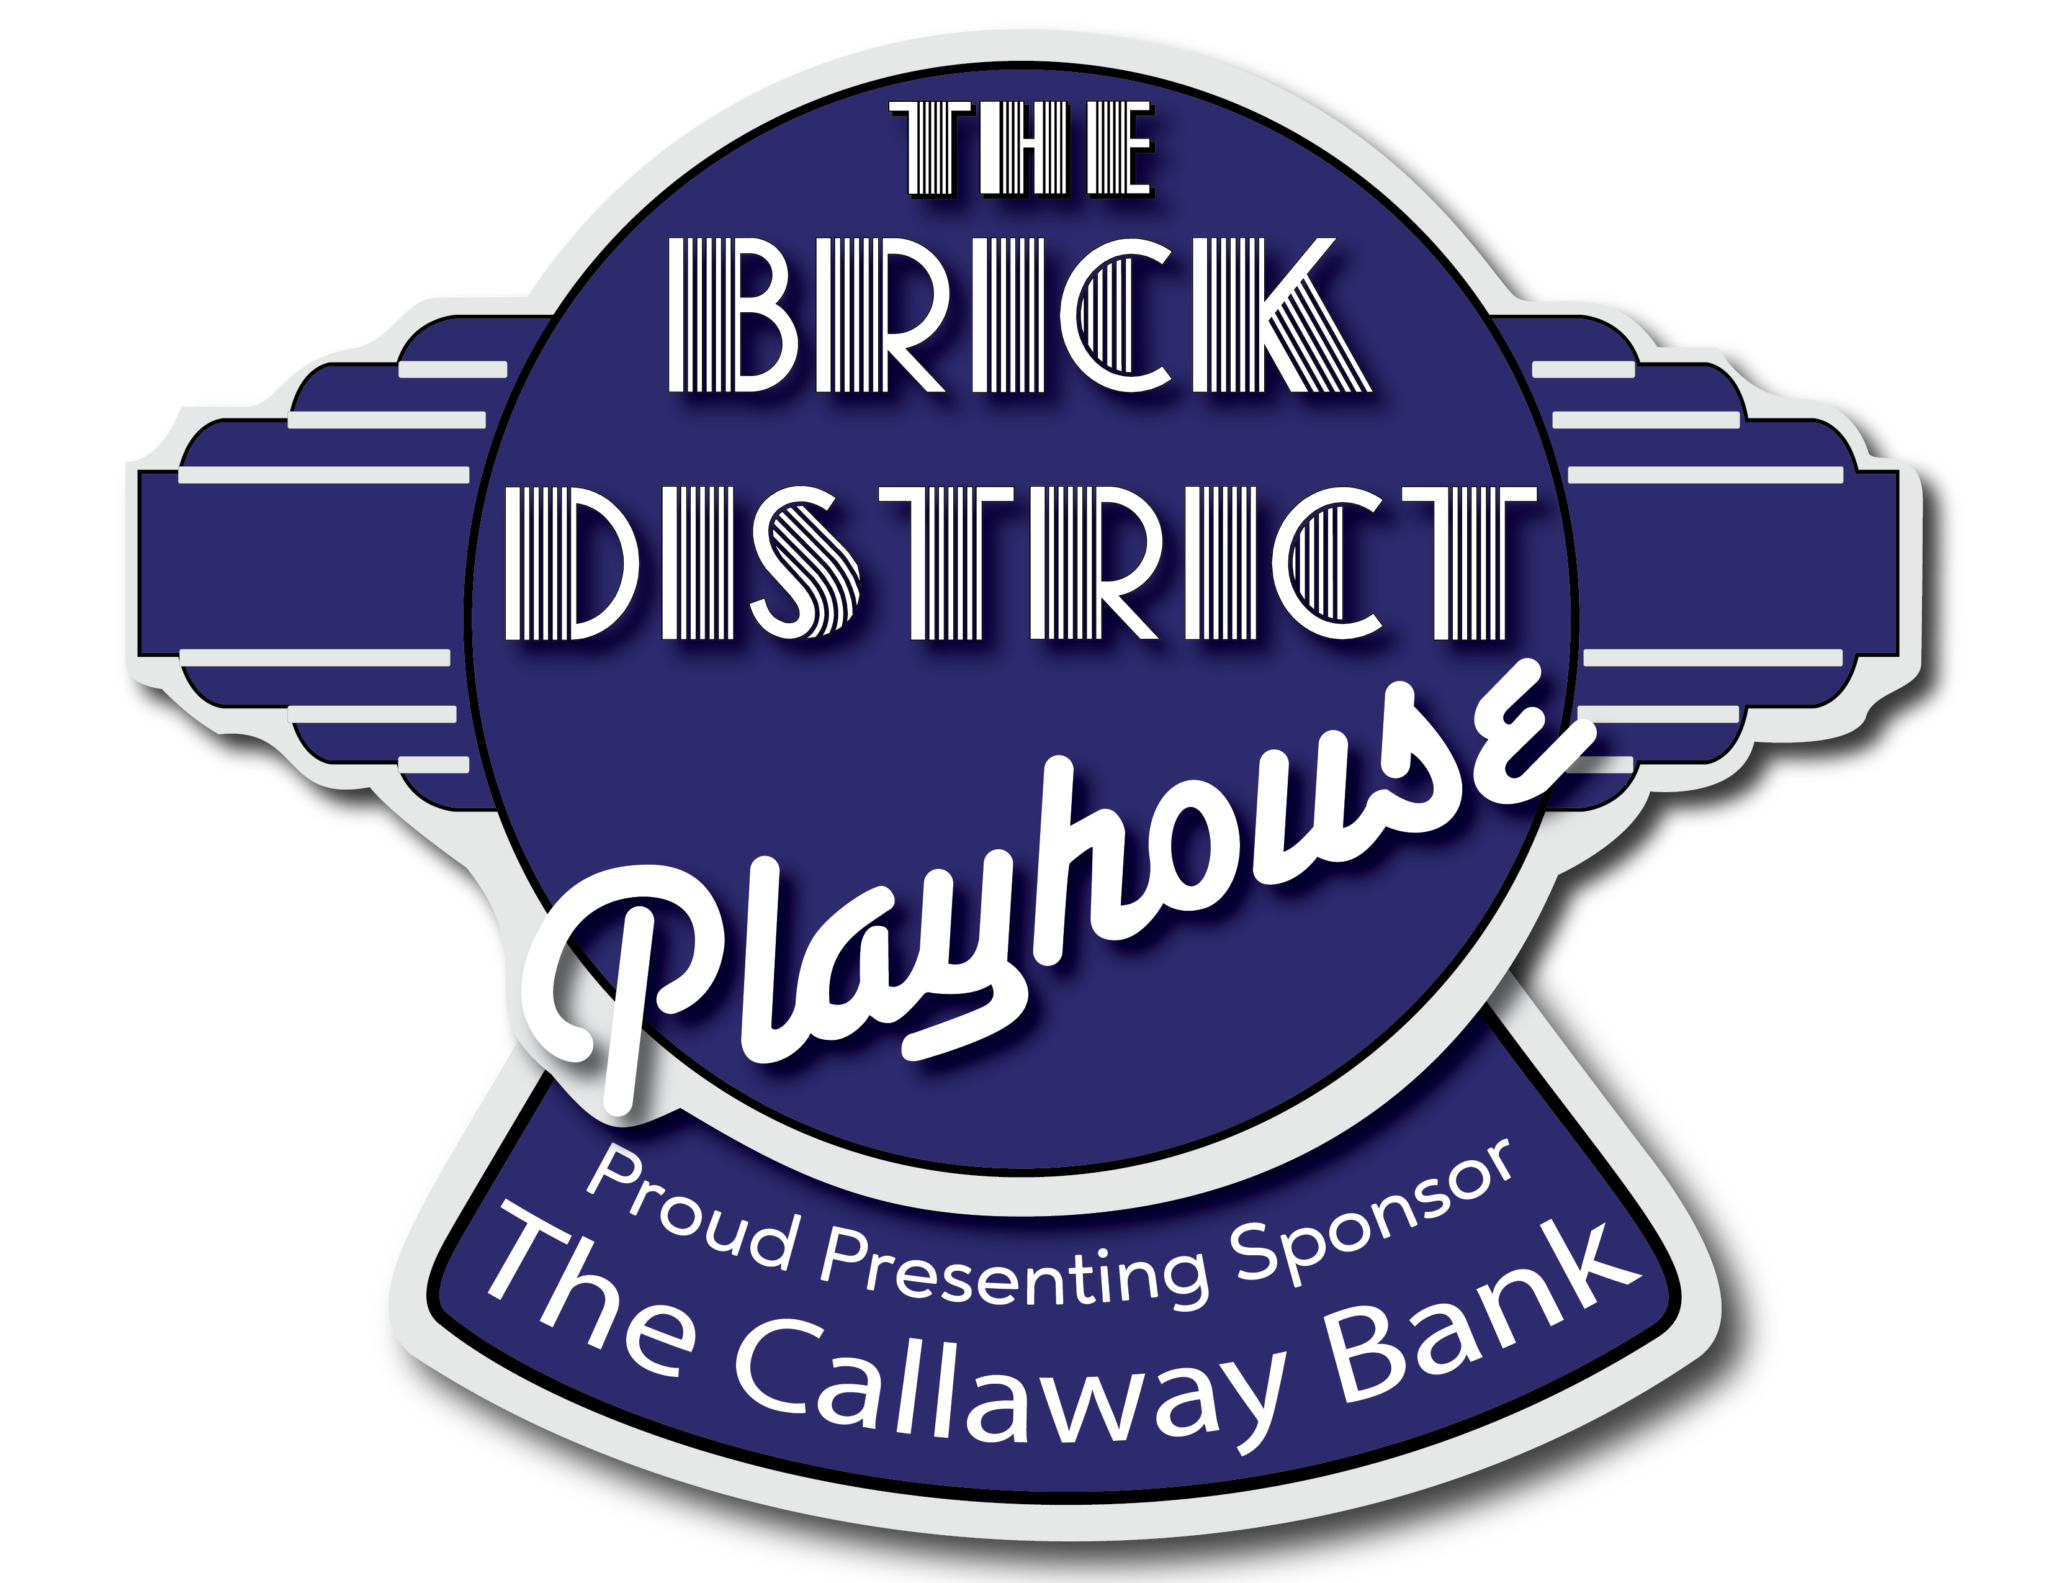 Contact Us The Brick District Playhouse